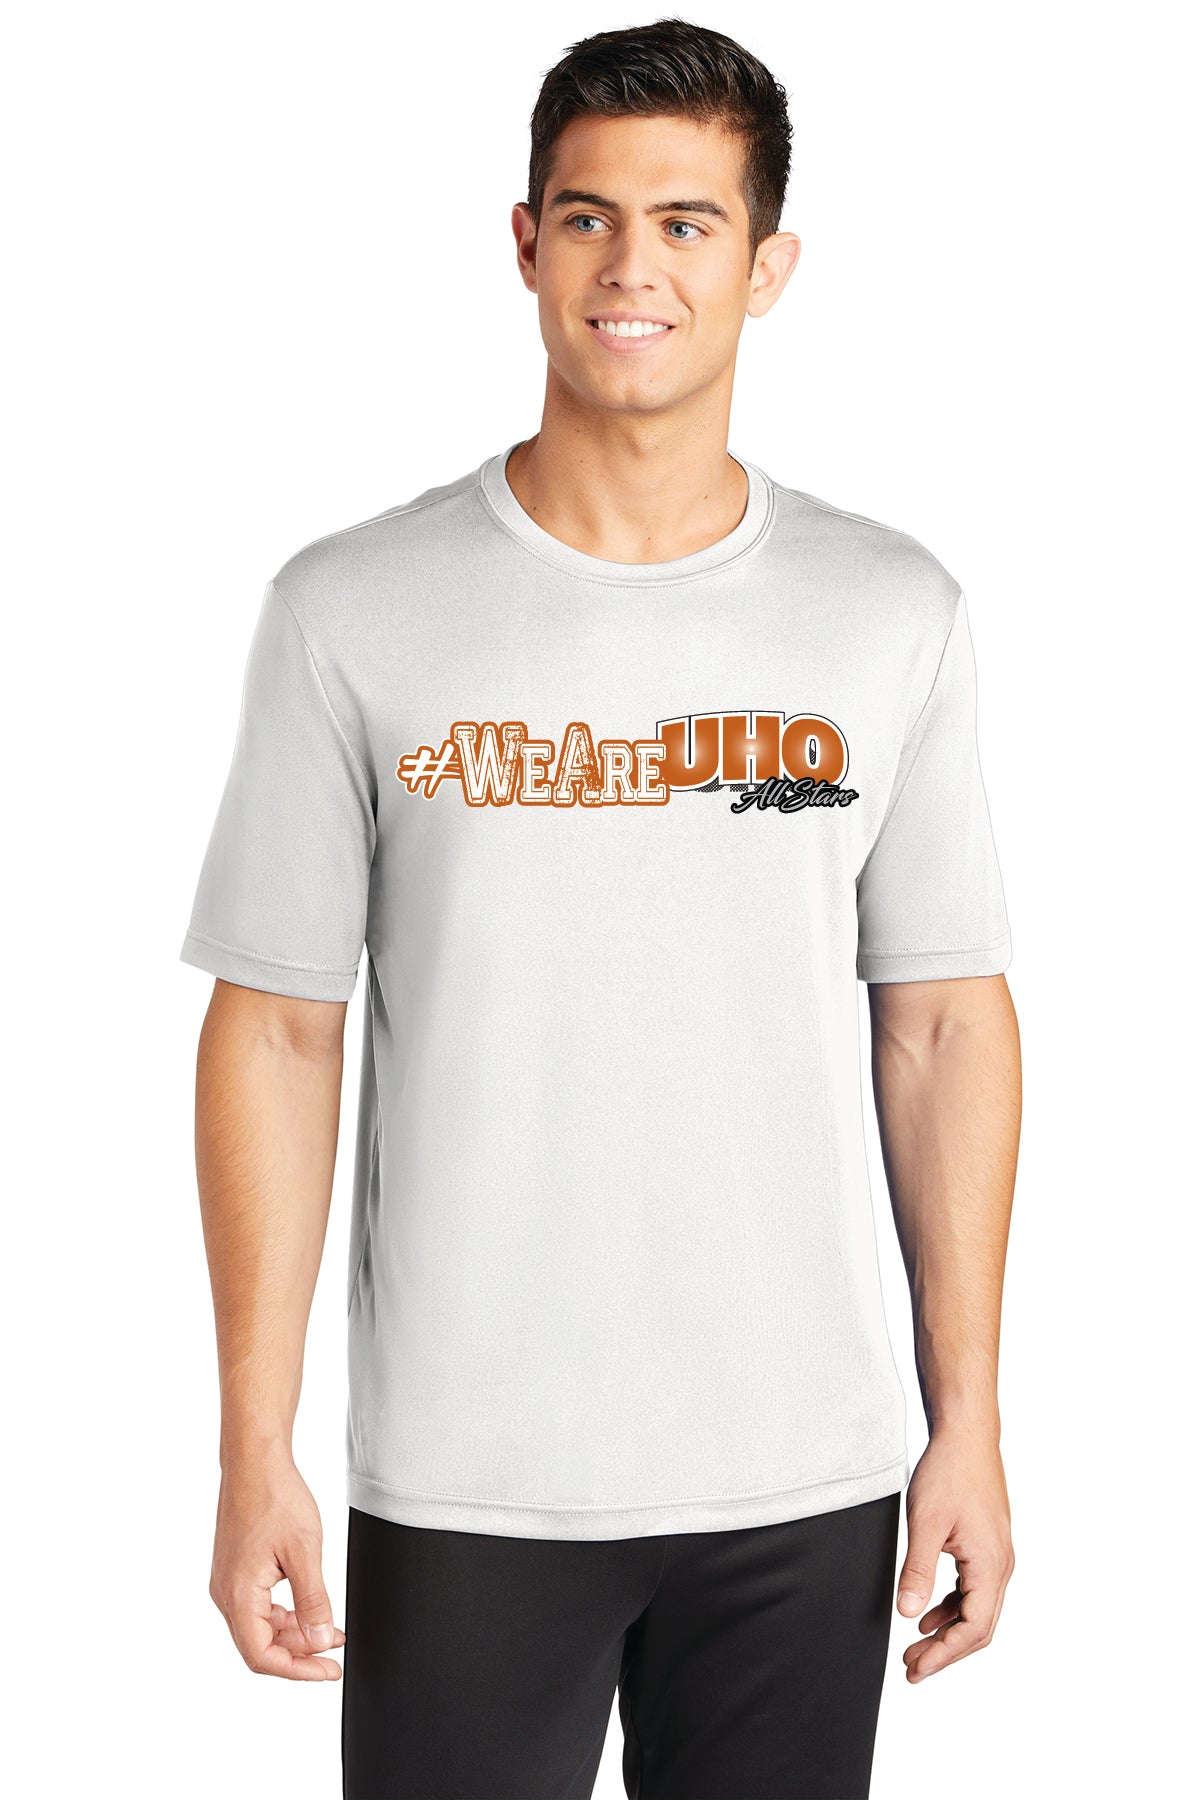 We Are UHO All Stars Moisture-Wicking T-Shirt